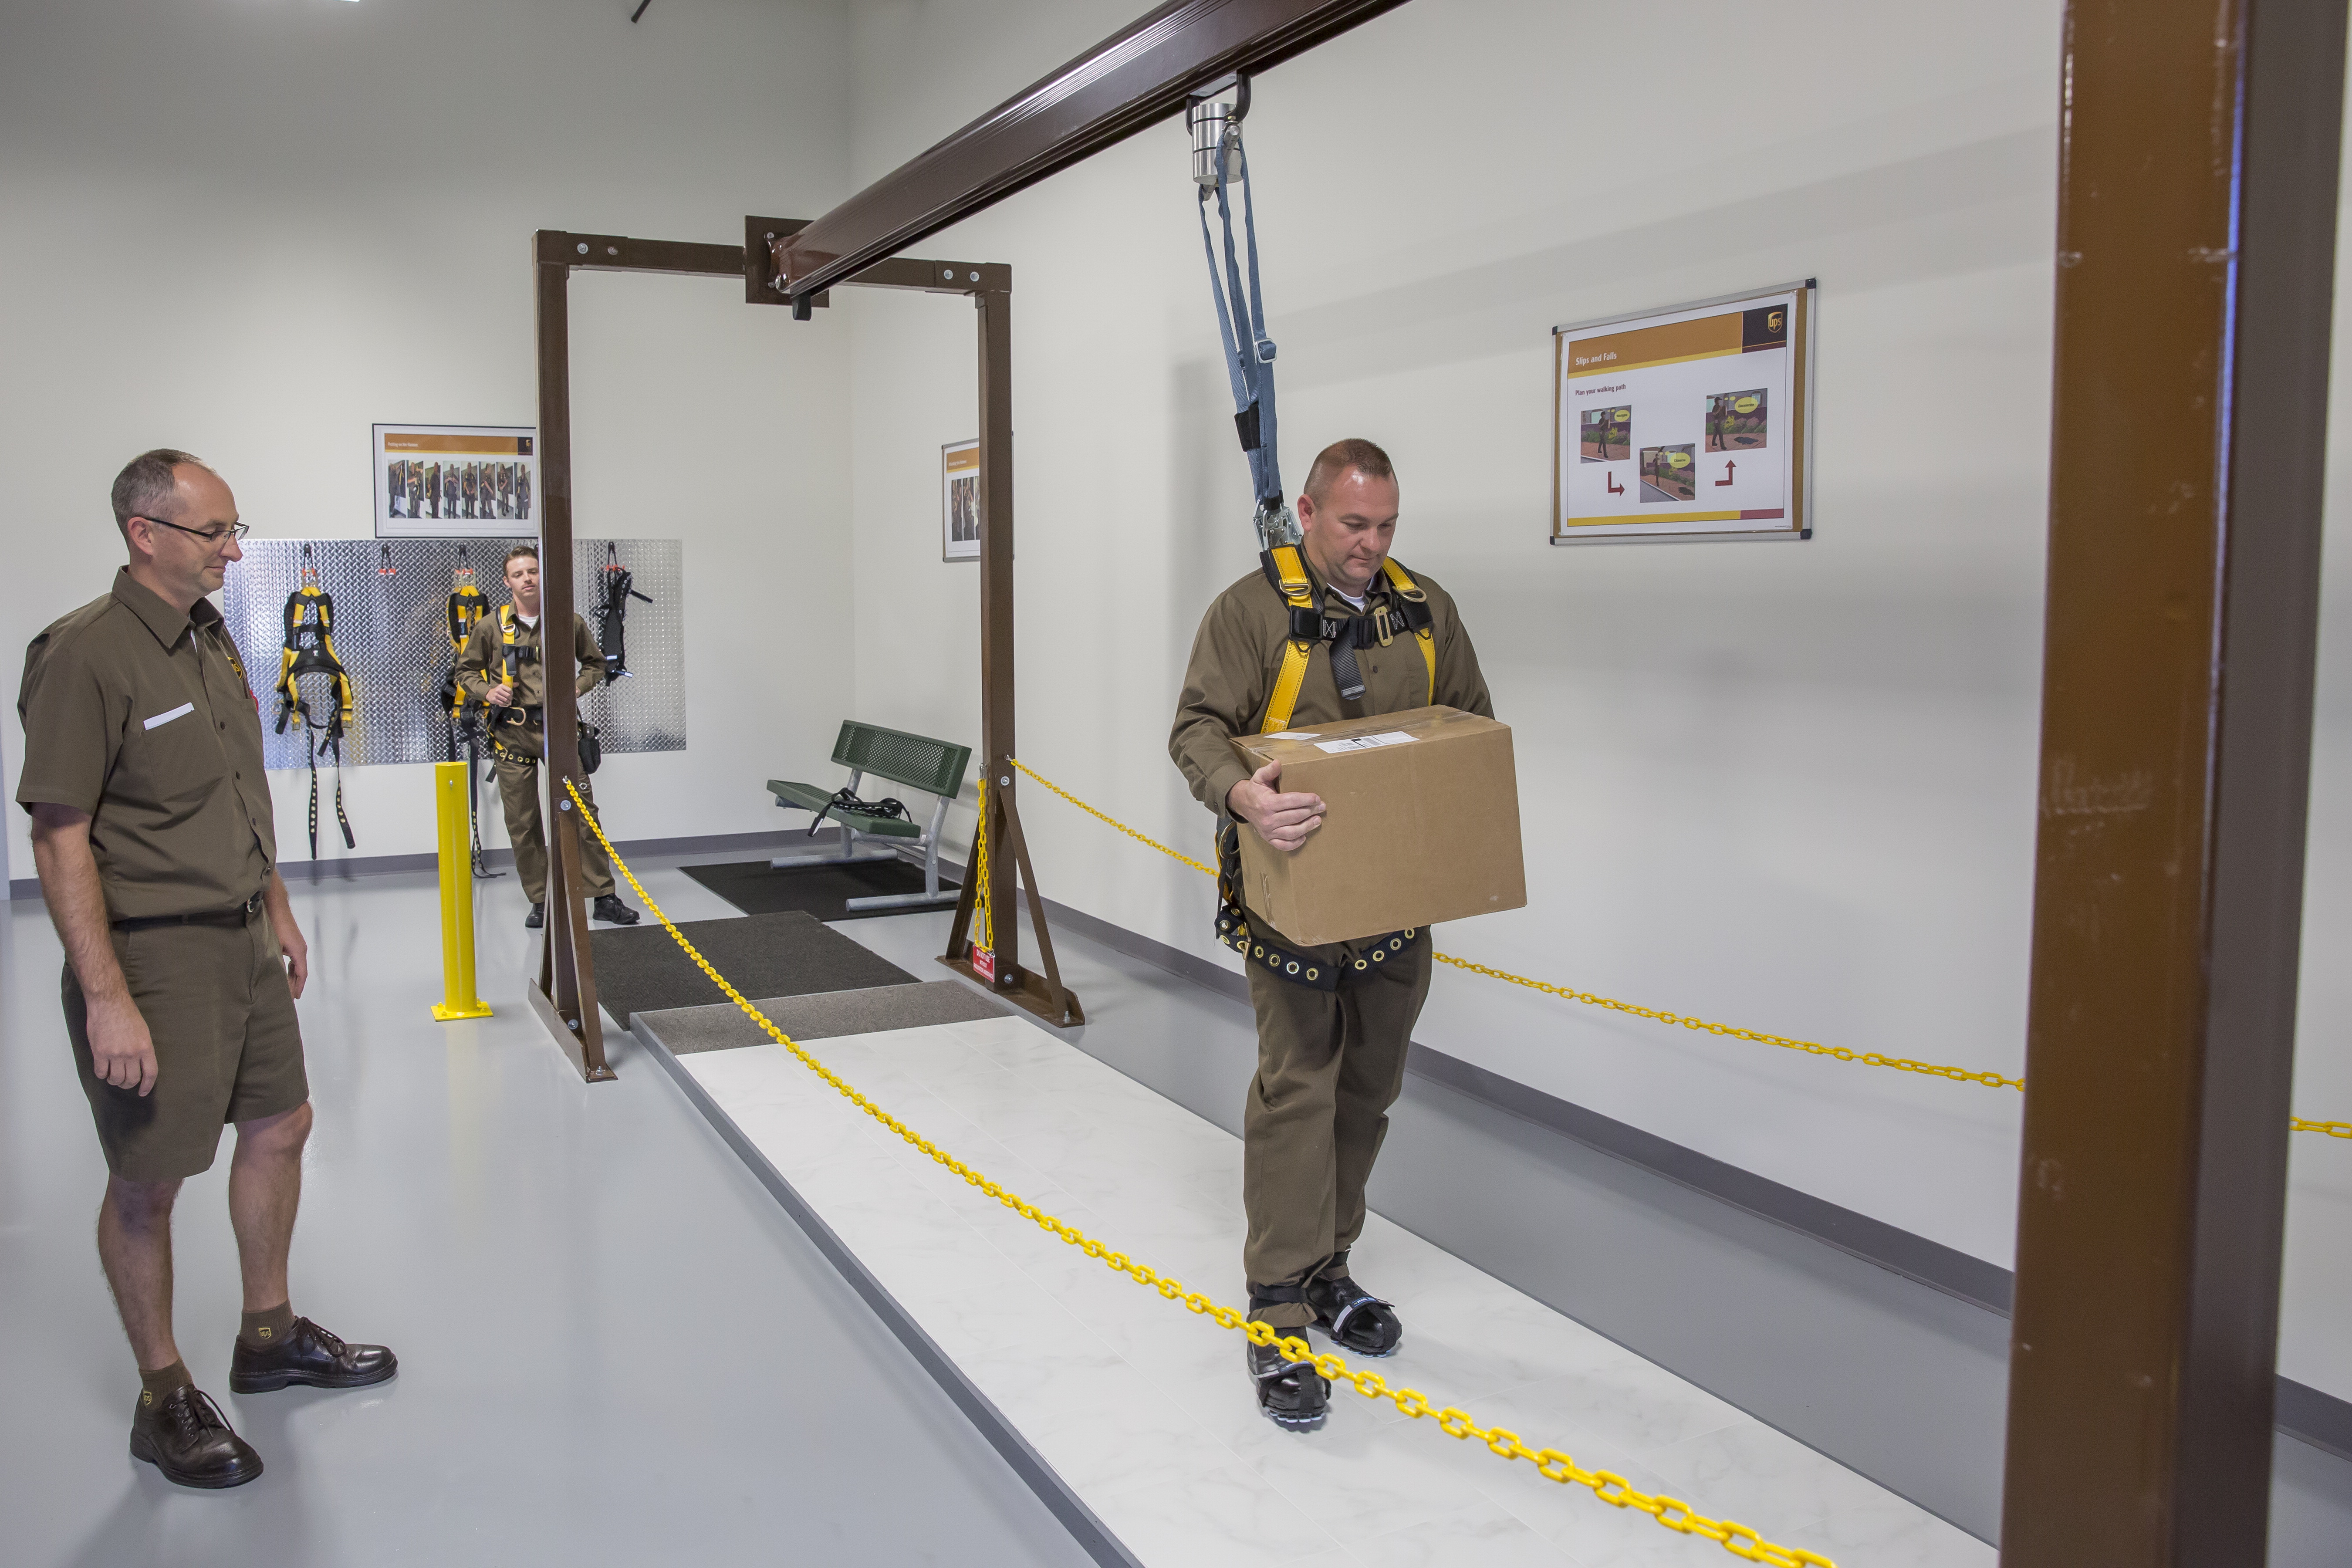 UPS Driver Training Center Opens in West Boylston